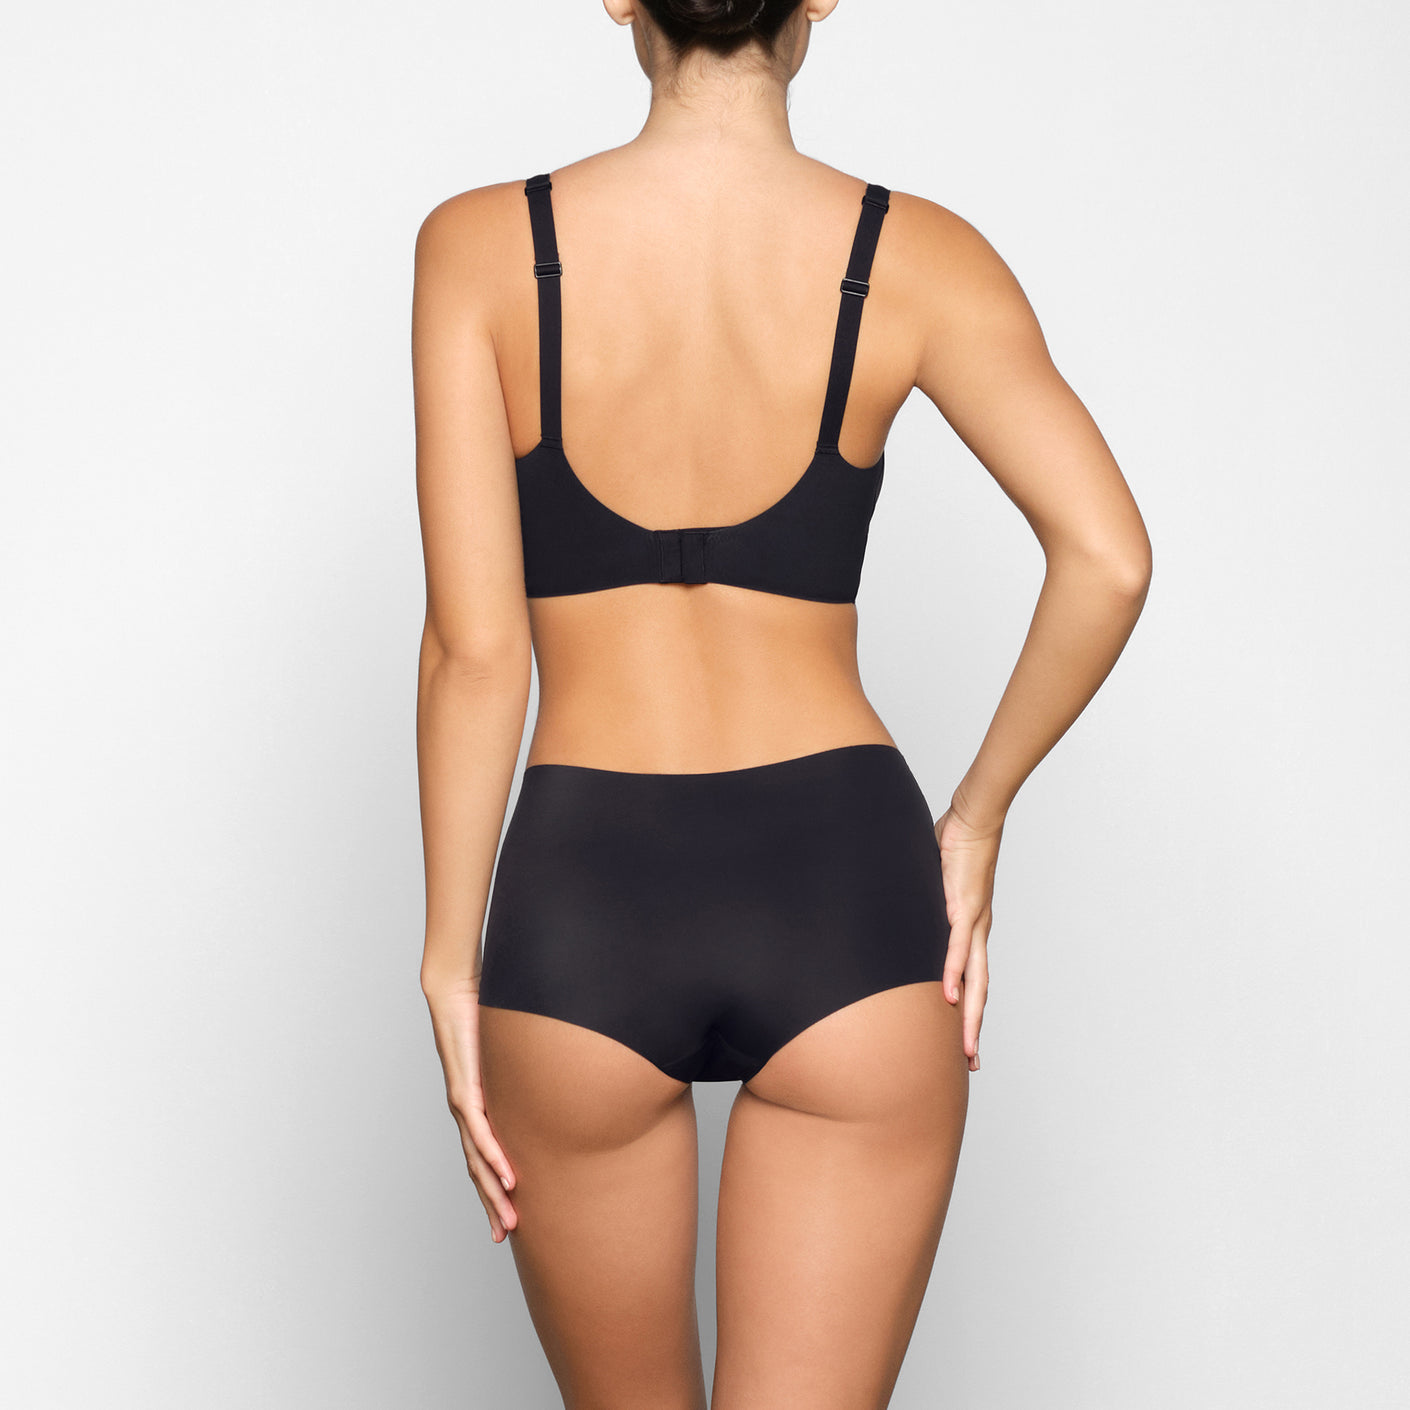 NWT SKIMS NAKED PLUNGE BRALETTE in ONYX: Size Small $44